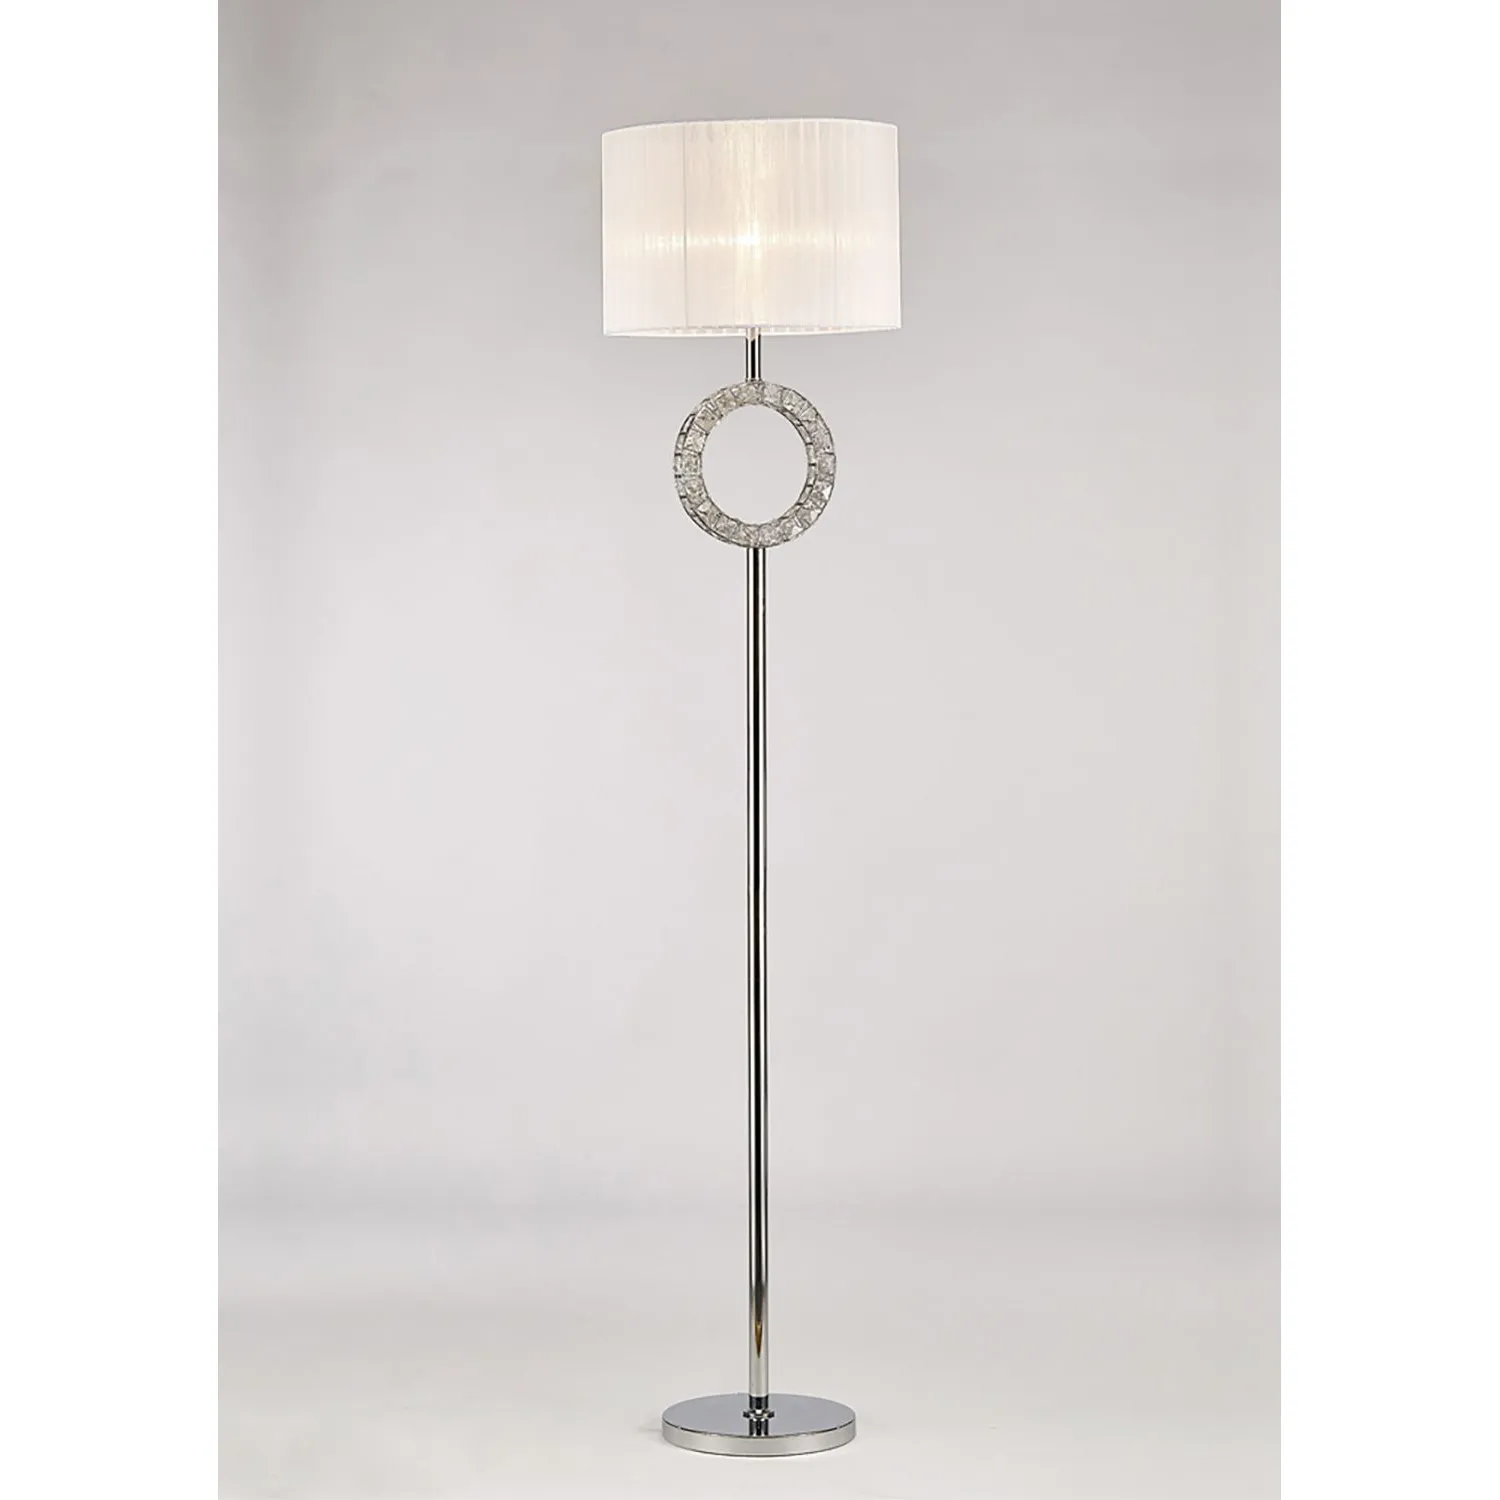 Florence Round Floor Lamp With White Shade 1 Light E27 Polished Chrome Crystal Item Weight: 18.29kg